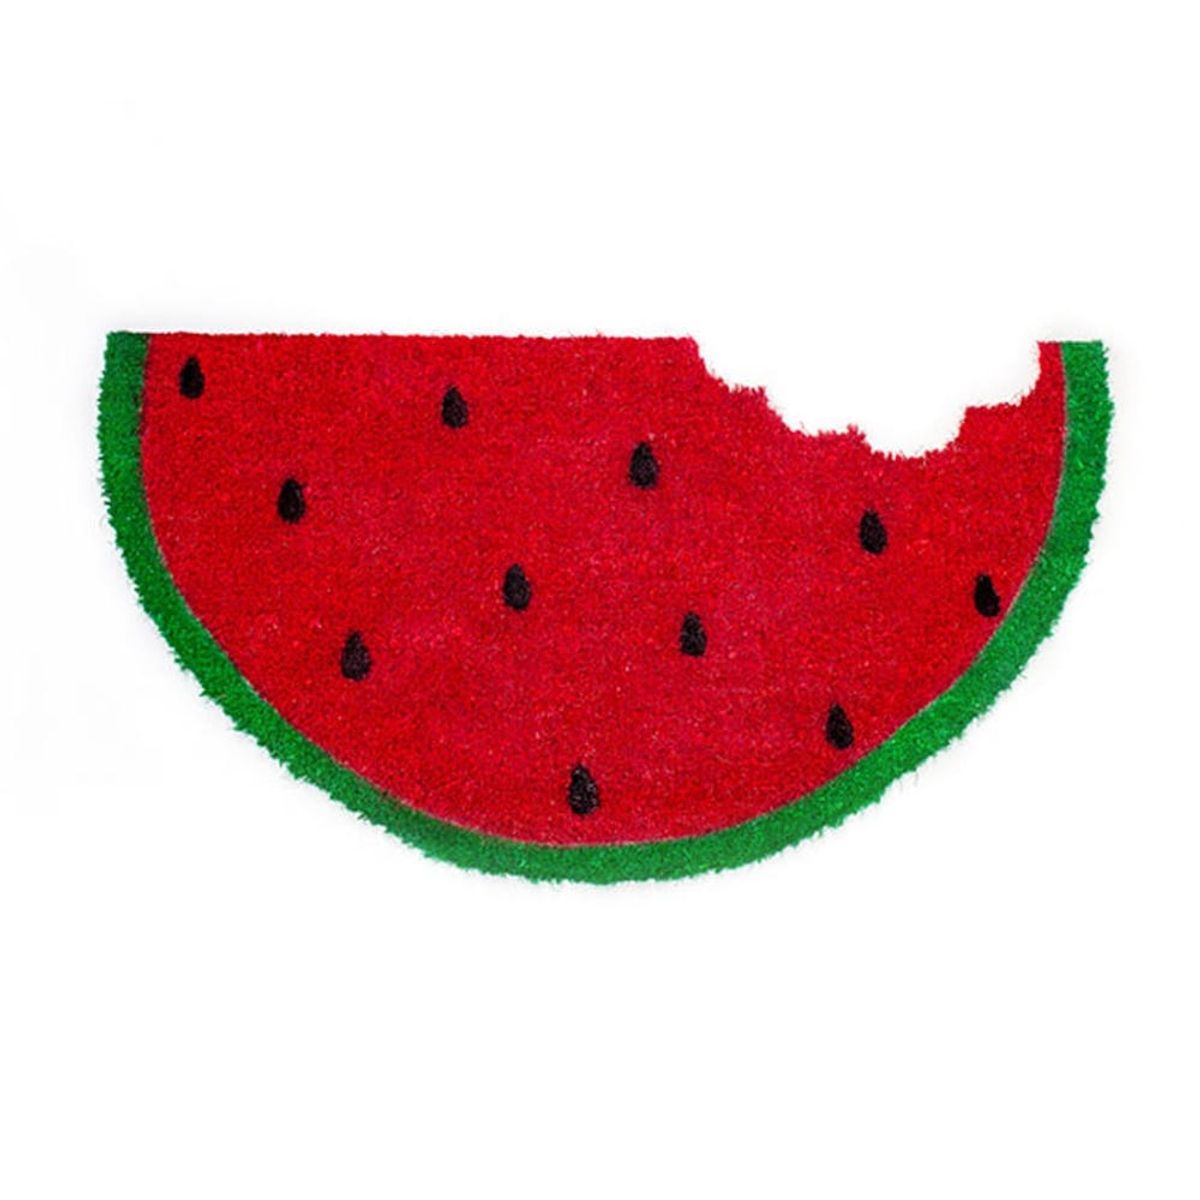 This Watermelon Doormat Is So Freakin’ Cute You Might Not Want to Step on It